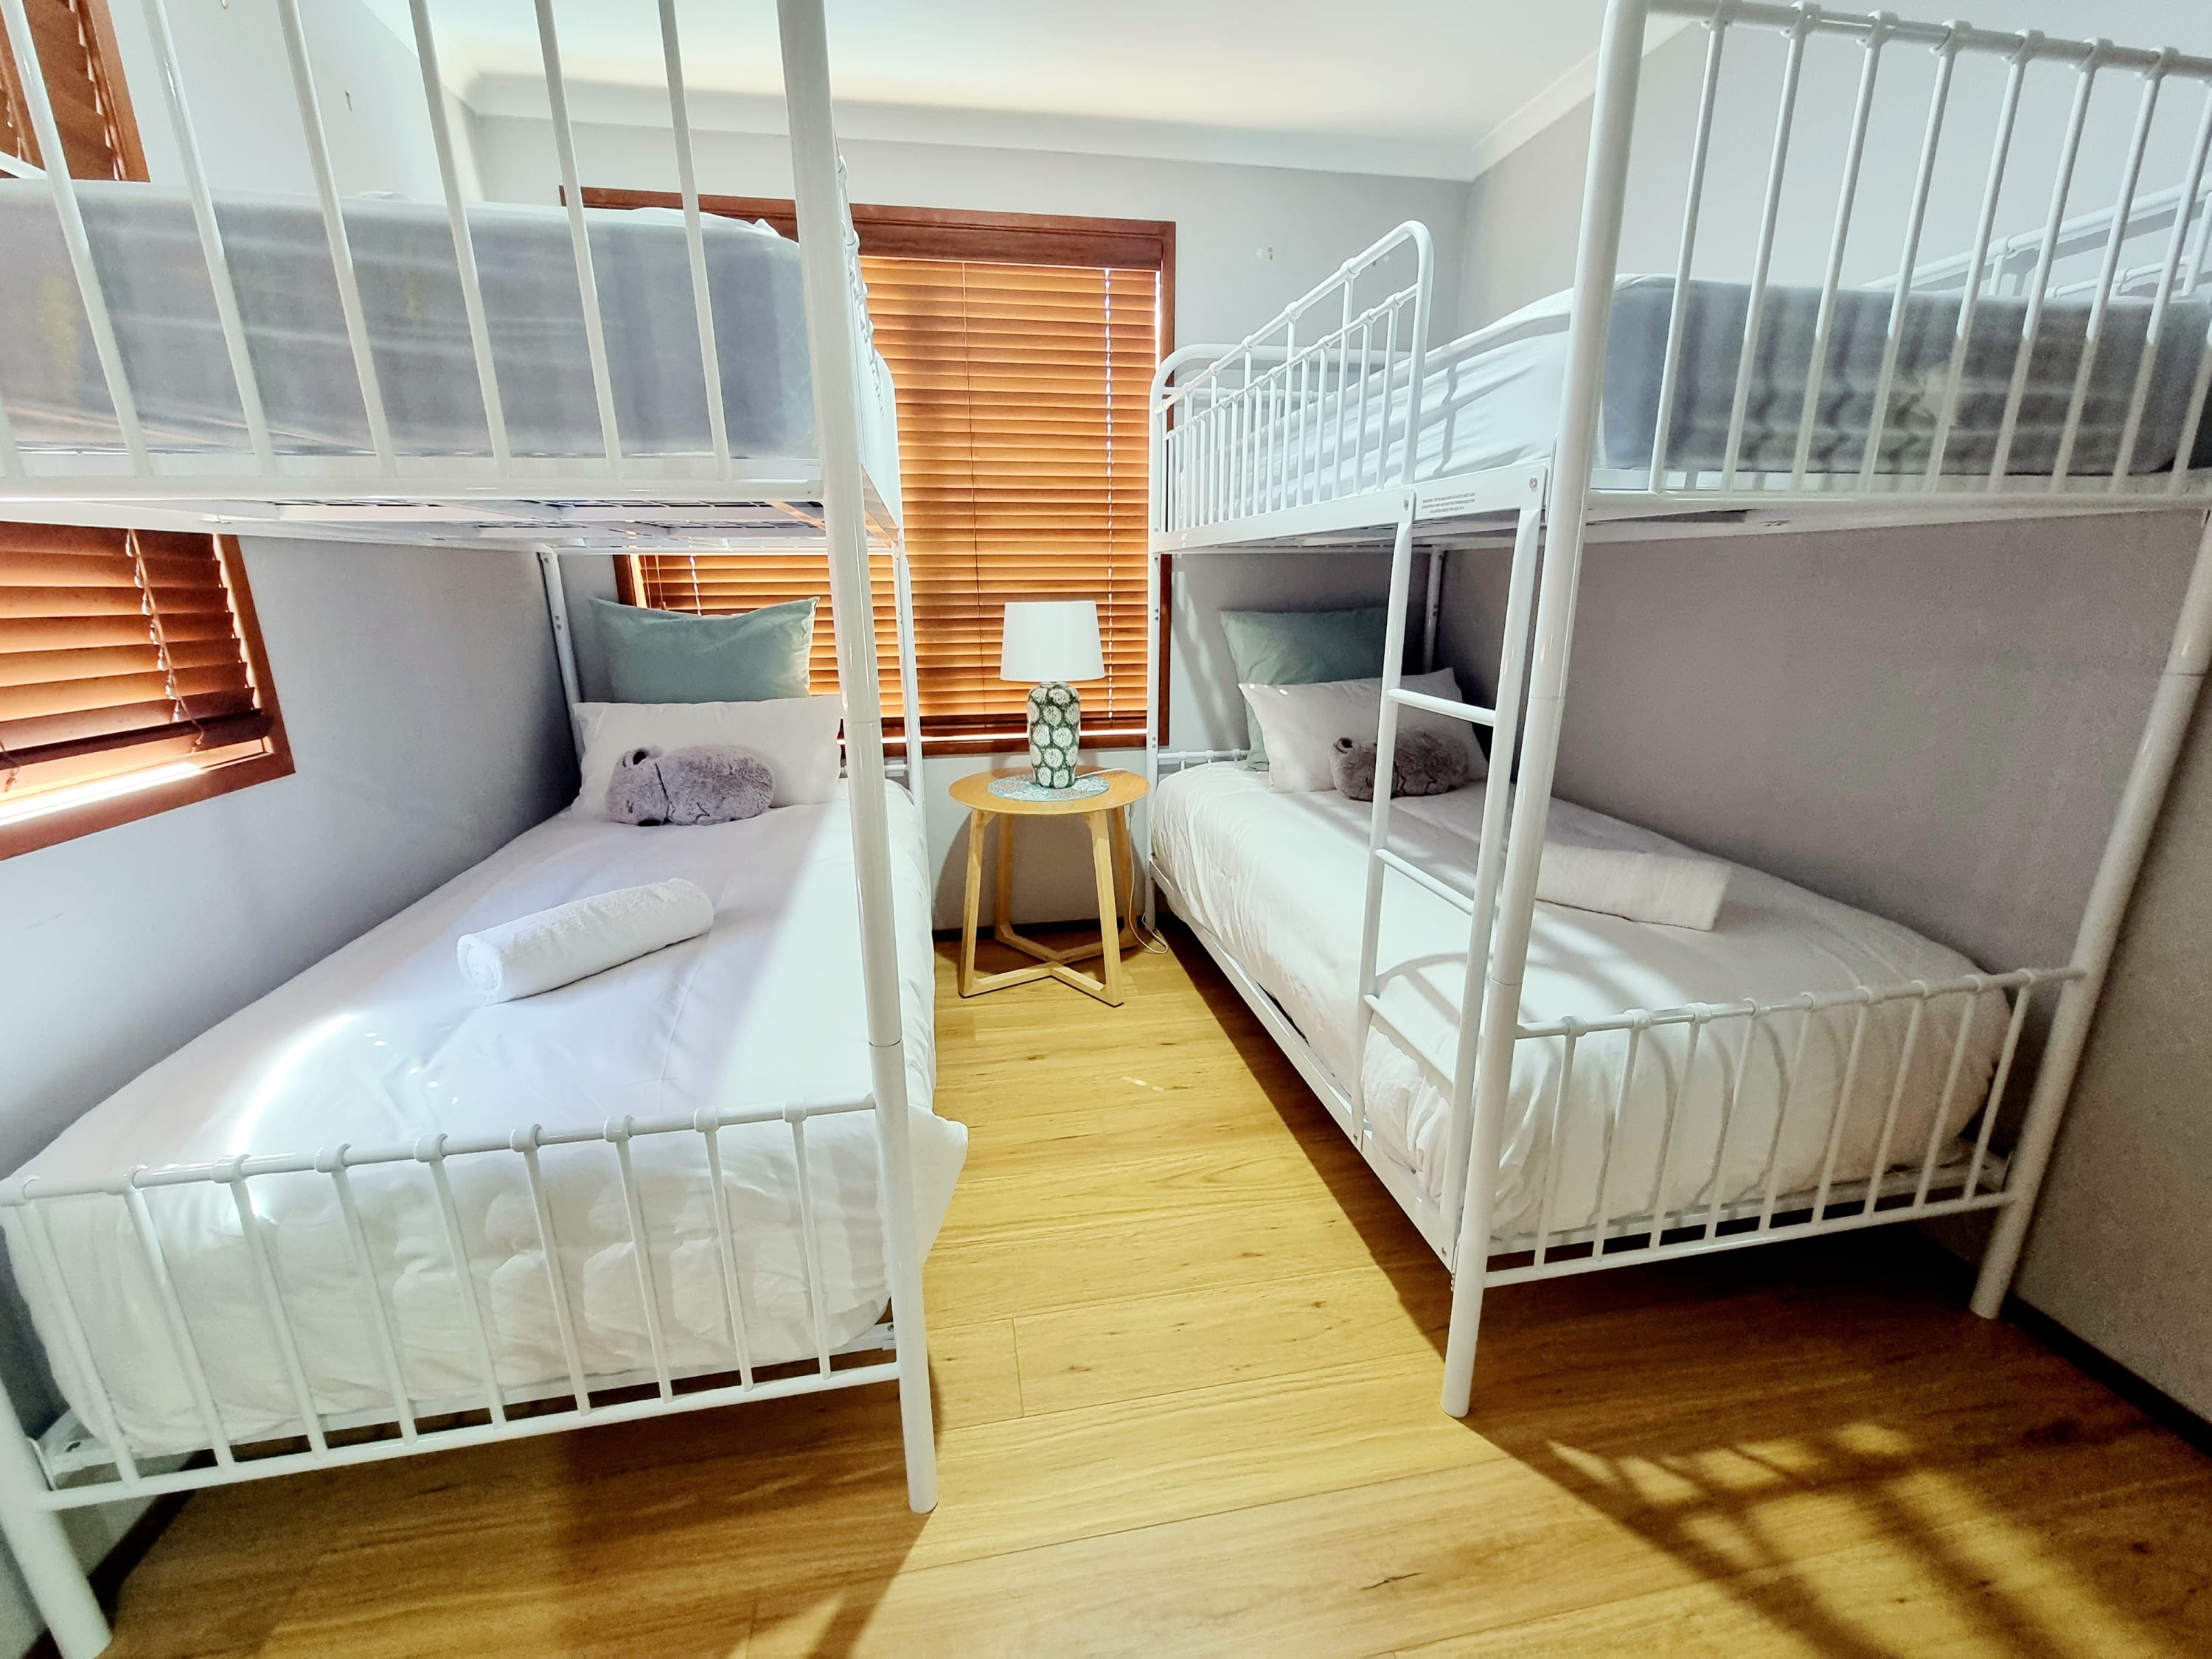 Bedroom 4 -  to use the upper beds of the bunk beds please bring your own linen, we will provide duvet and pillow only